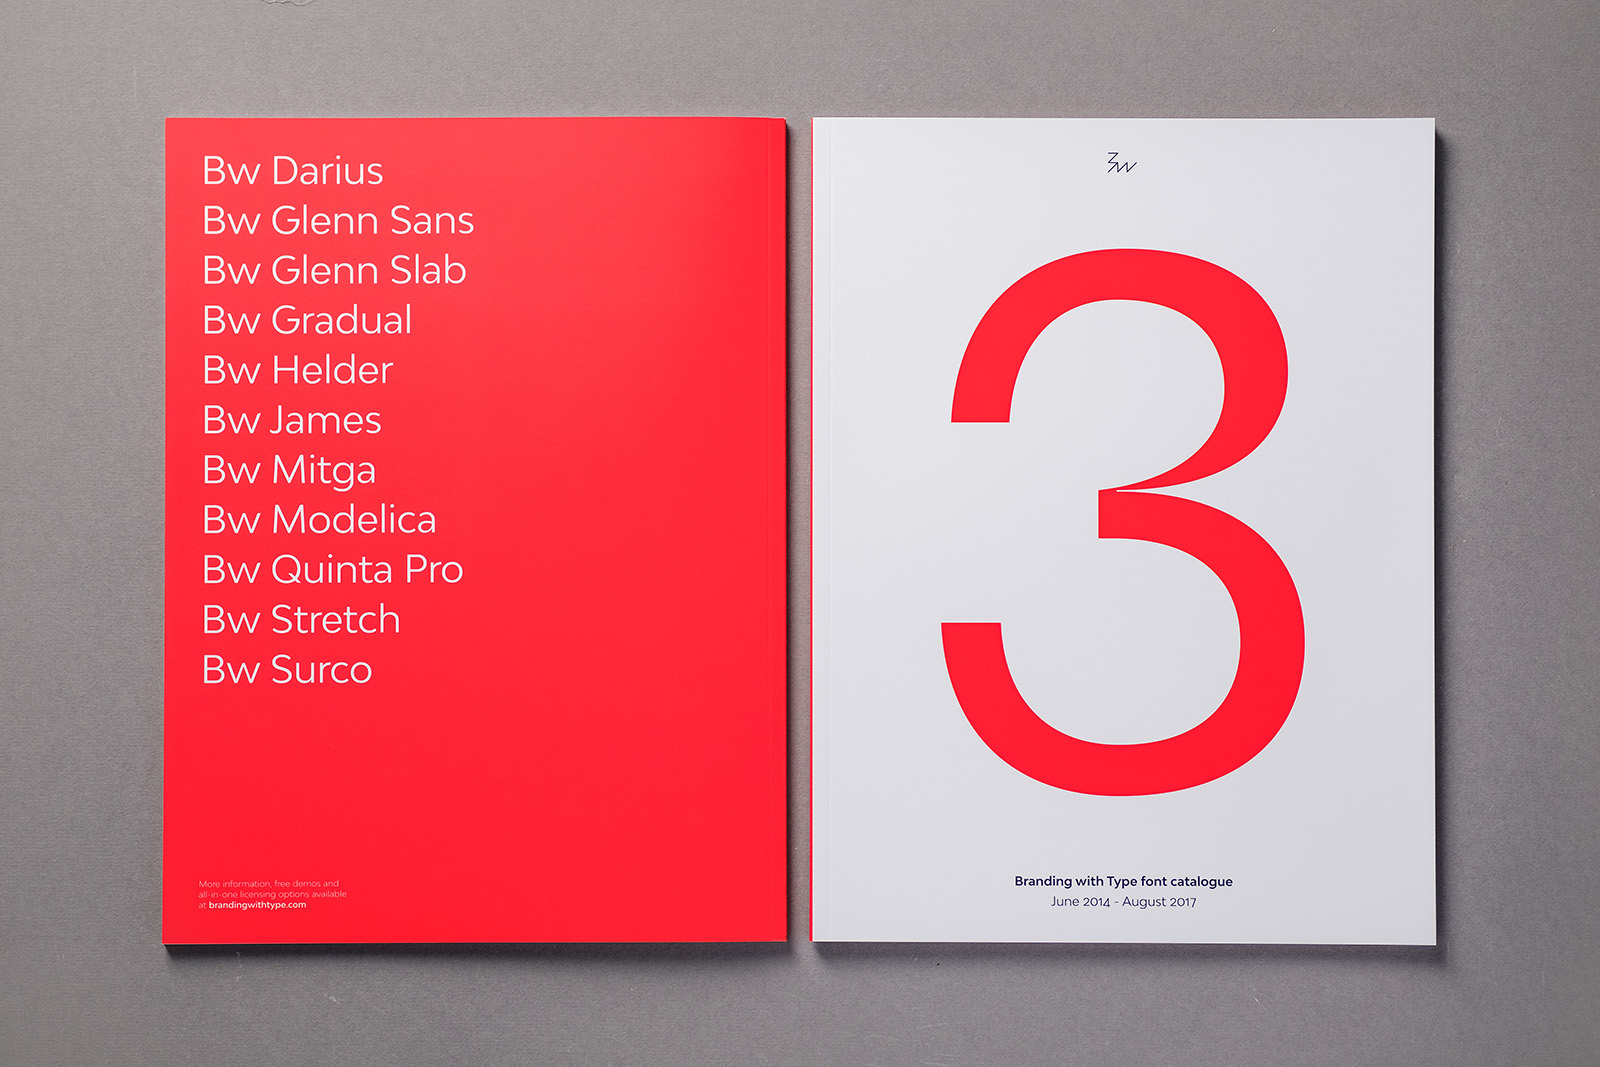 Branding with Type font catalogue